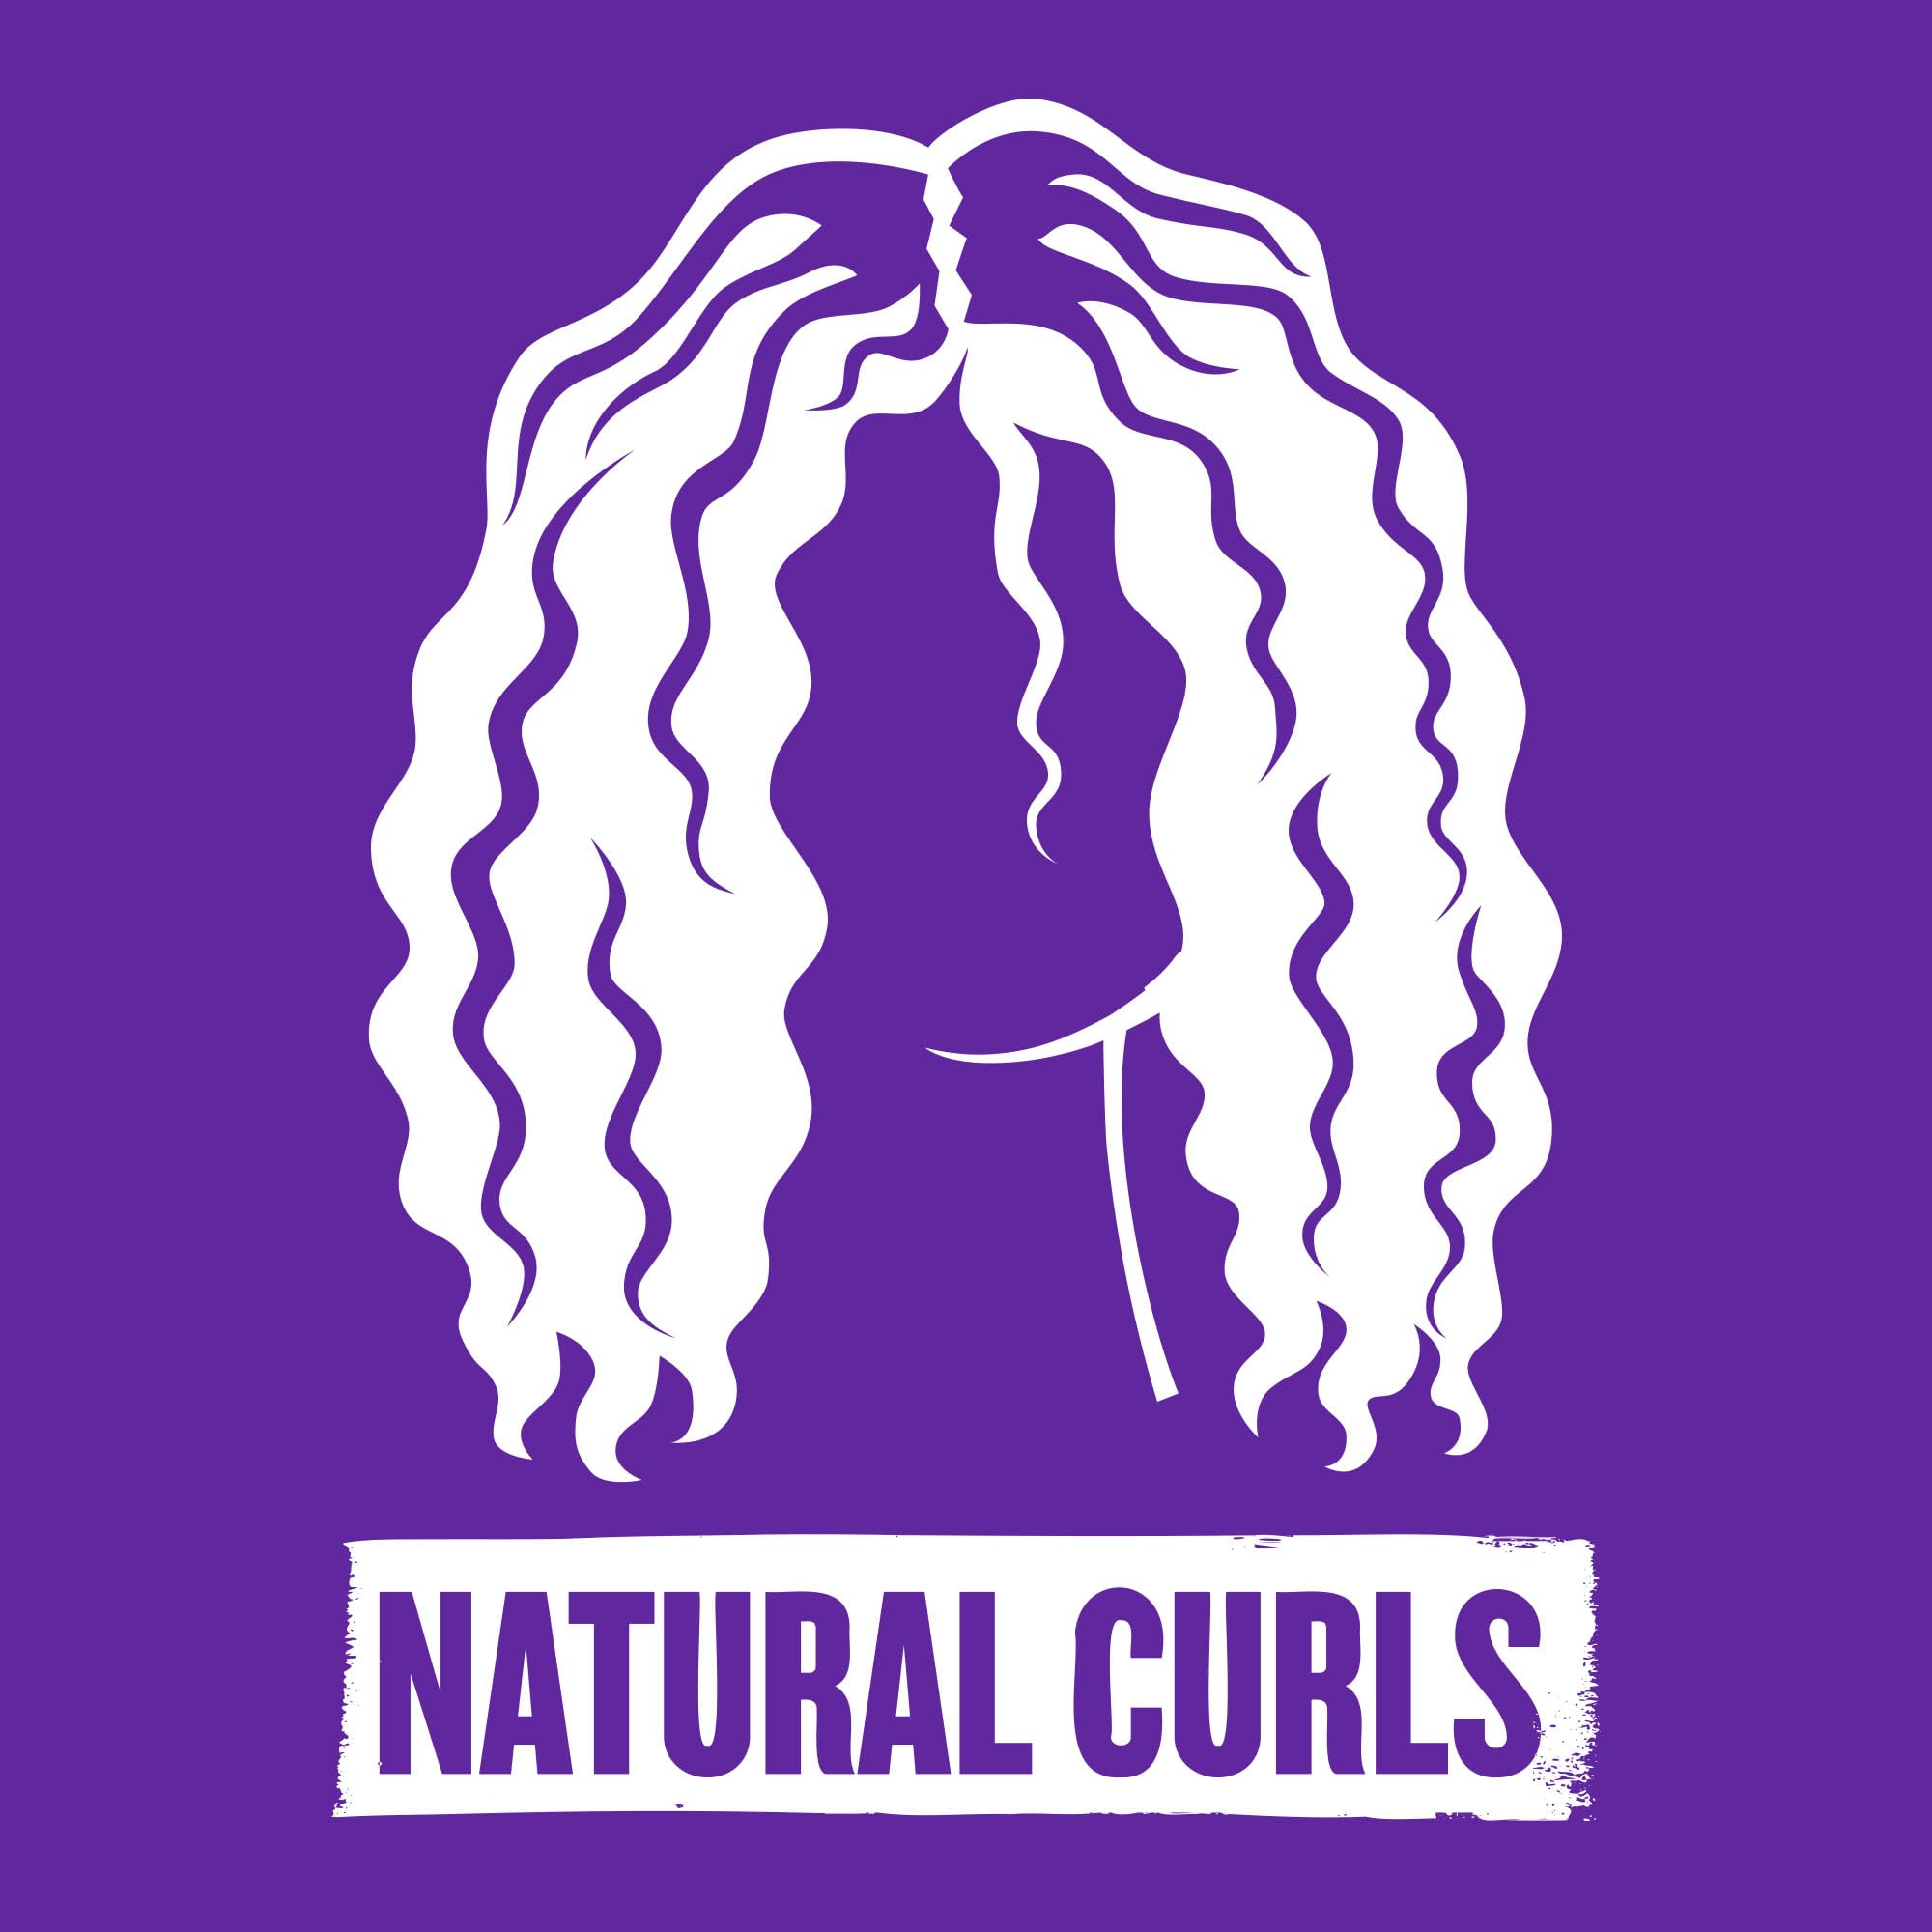 Bed Head Curlipops .5” Tourmaline Ceramic Skinny Pop™ Styling Iron | Clamp-Free Curling Wand | for Tight, Bouncy Curls (1/2 Inch)